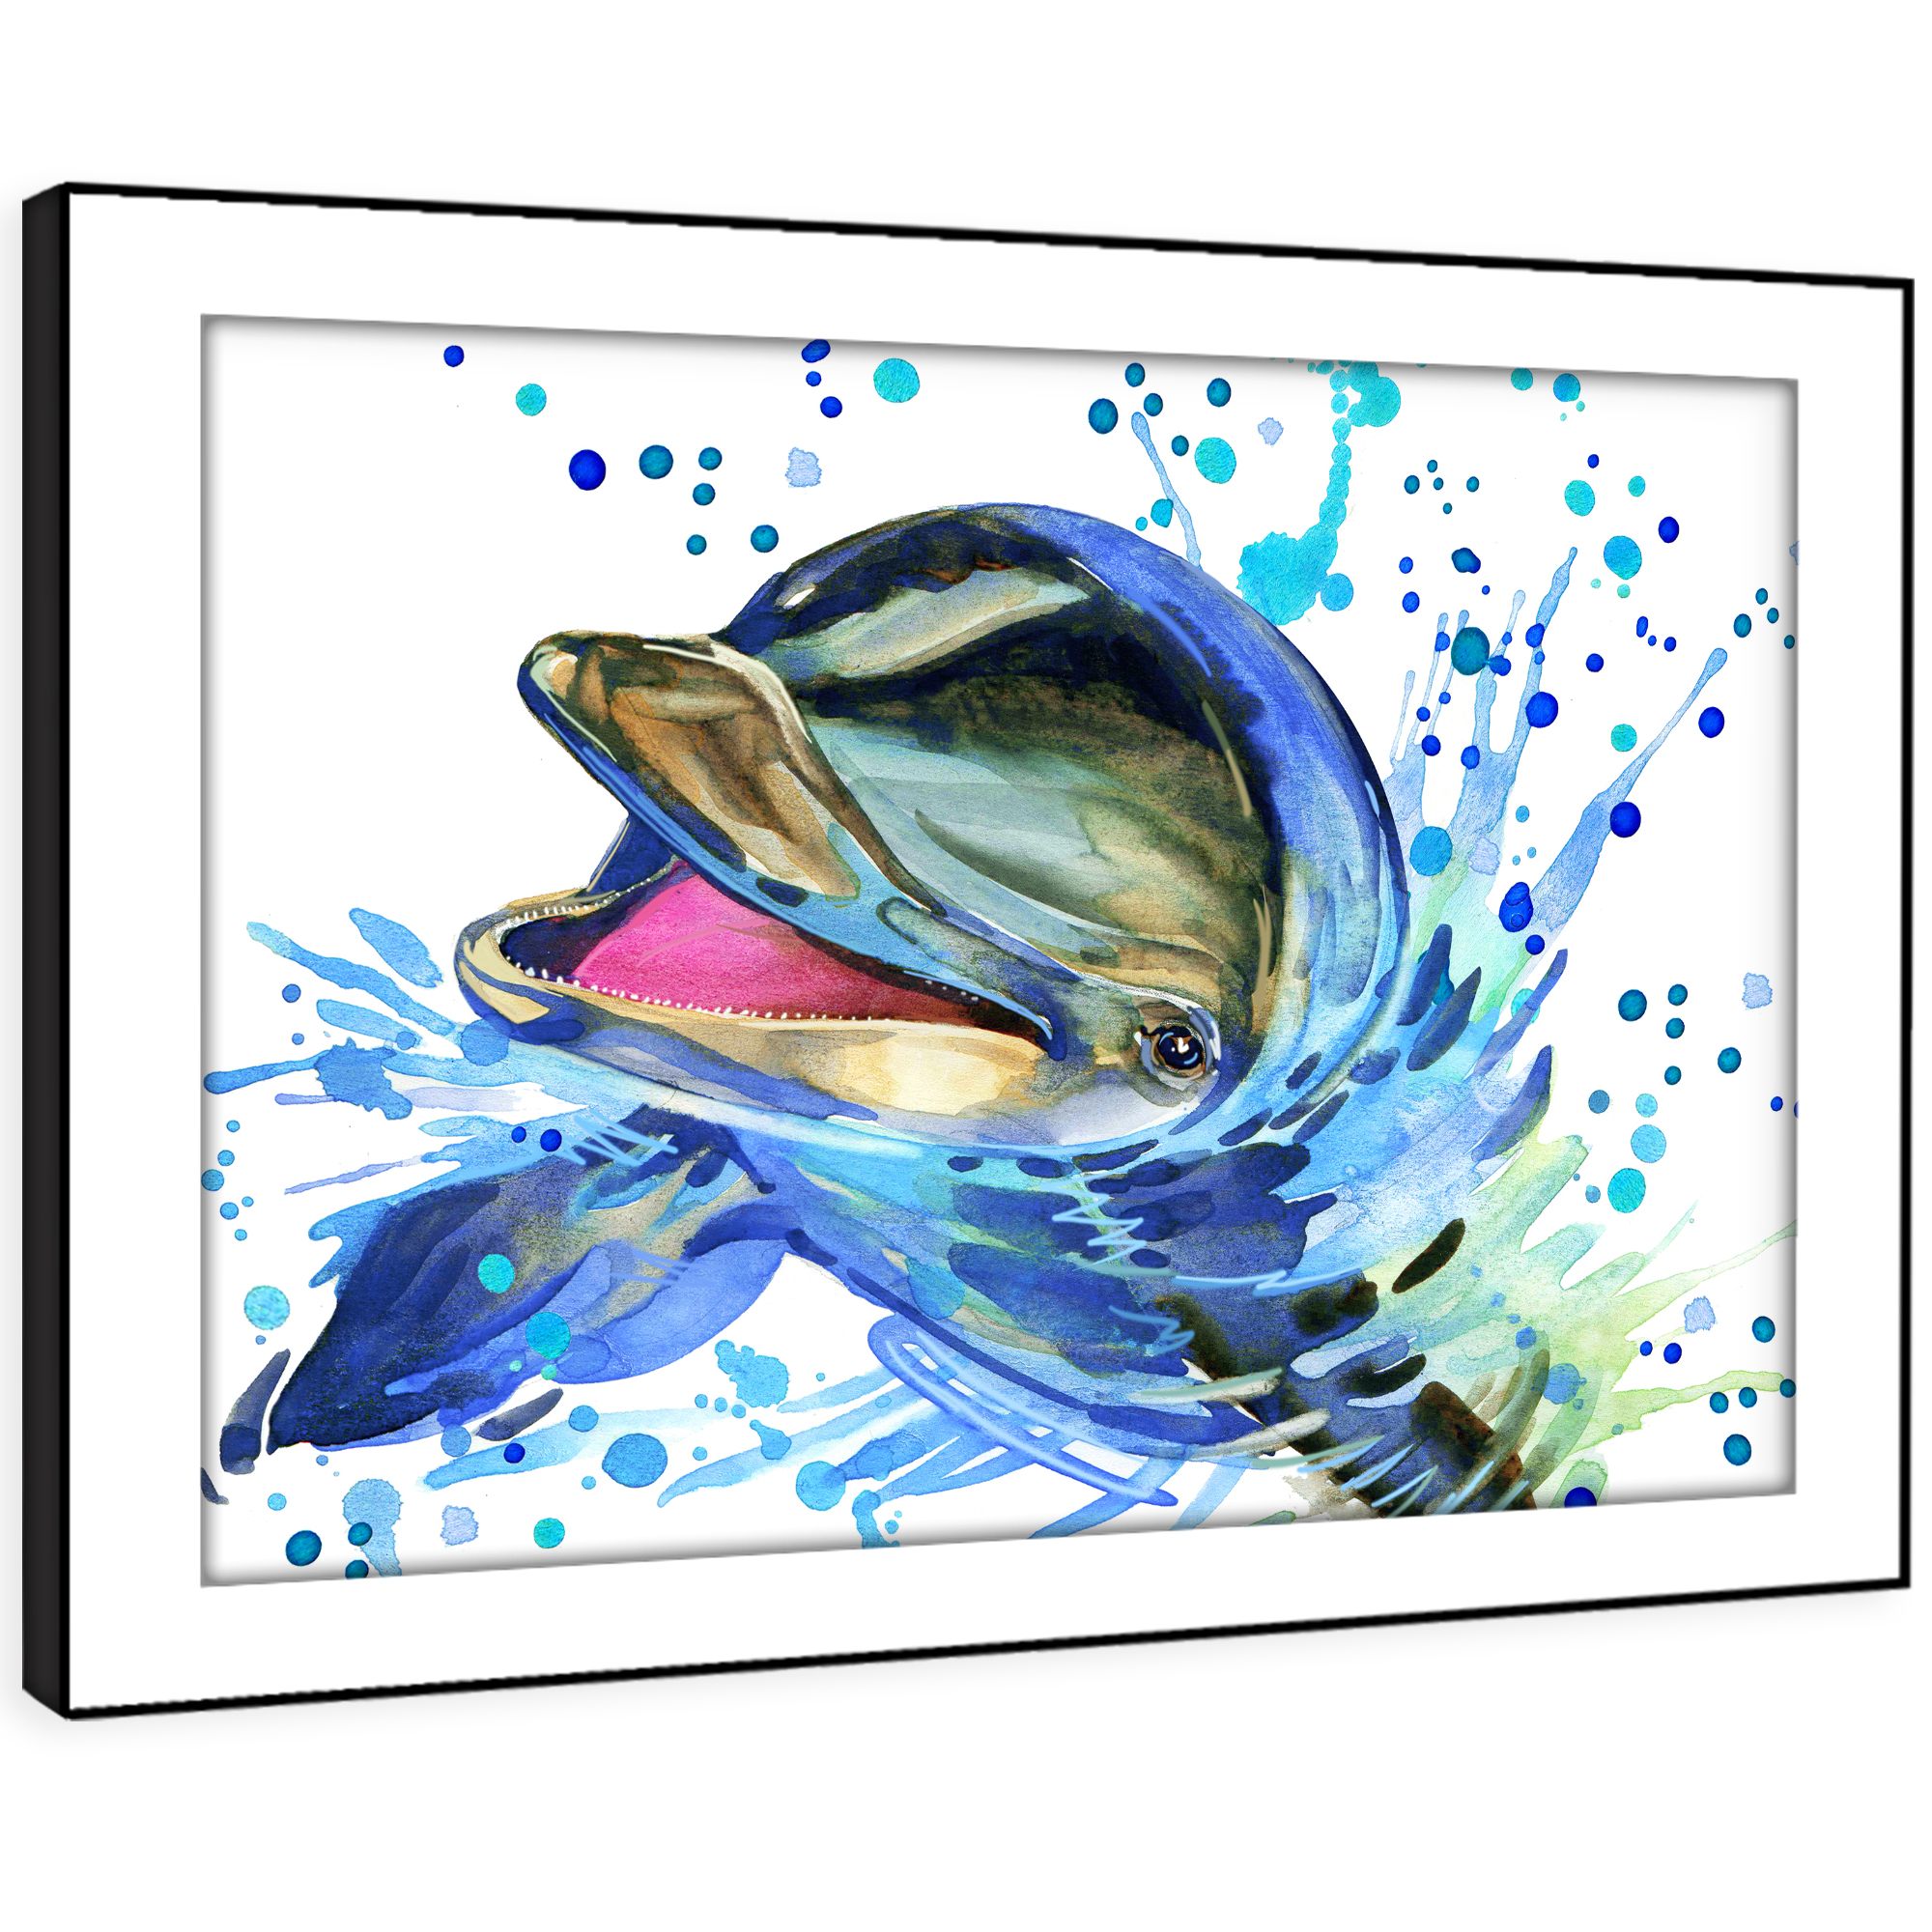 A728 Blue Watercolour Dolphin Funky Animal Framed Wall Art Large Picture Prints | eBay